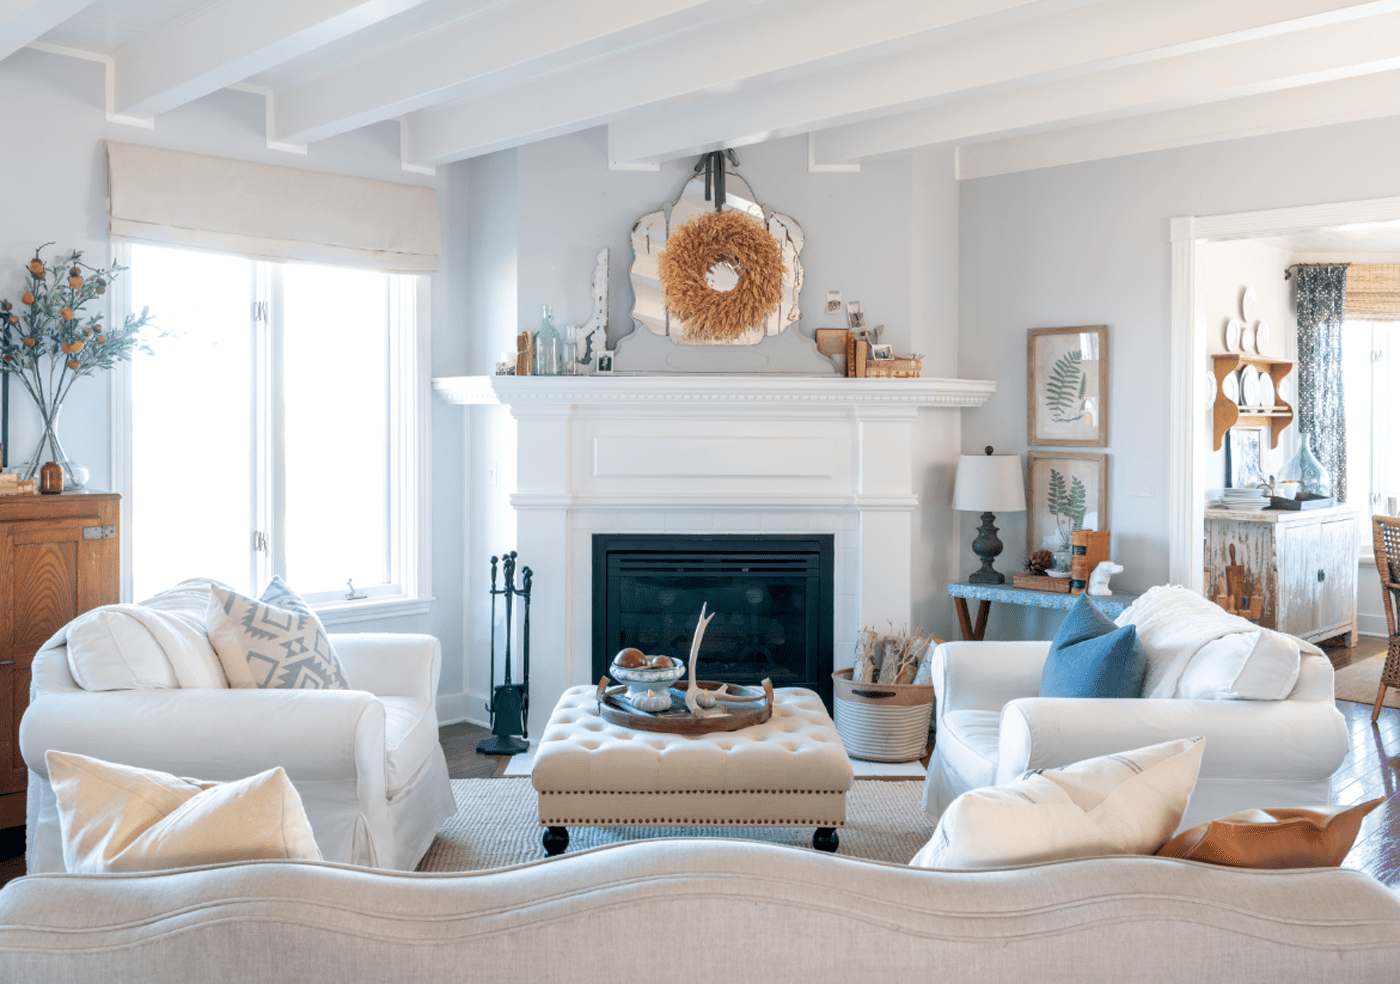 Modern farmhouse living with white walls and fireplace, a look that has been deep cleaned.